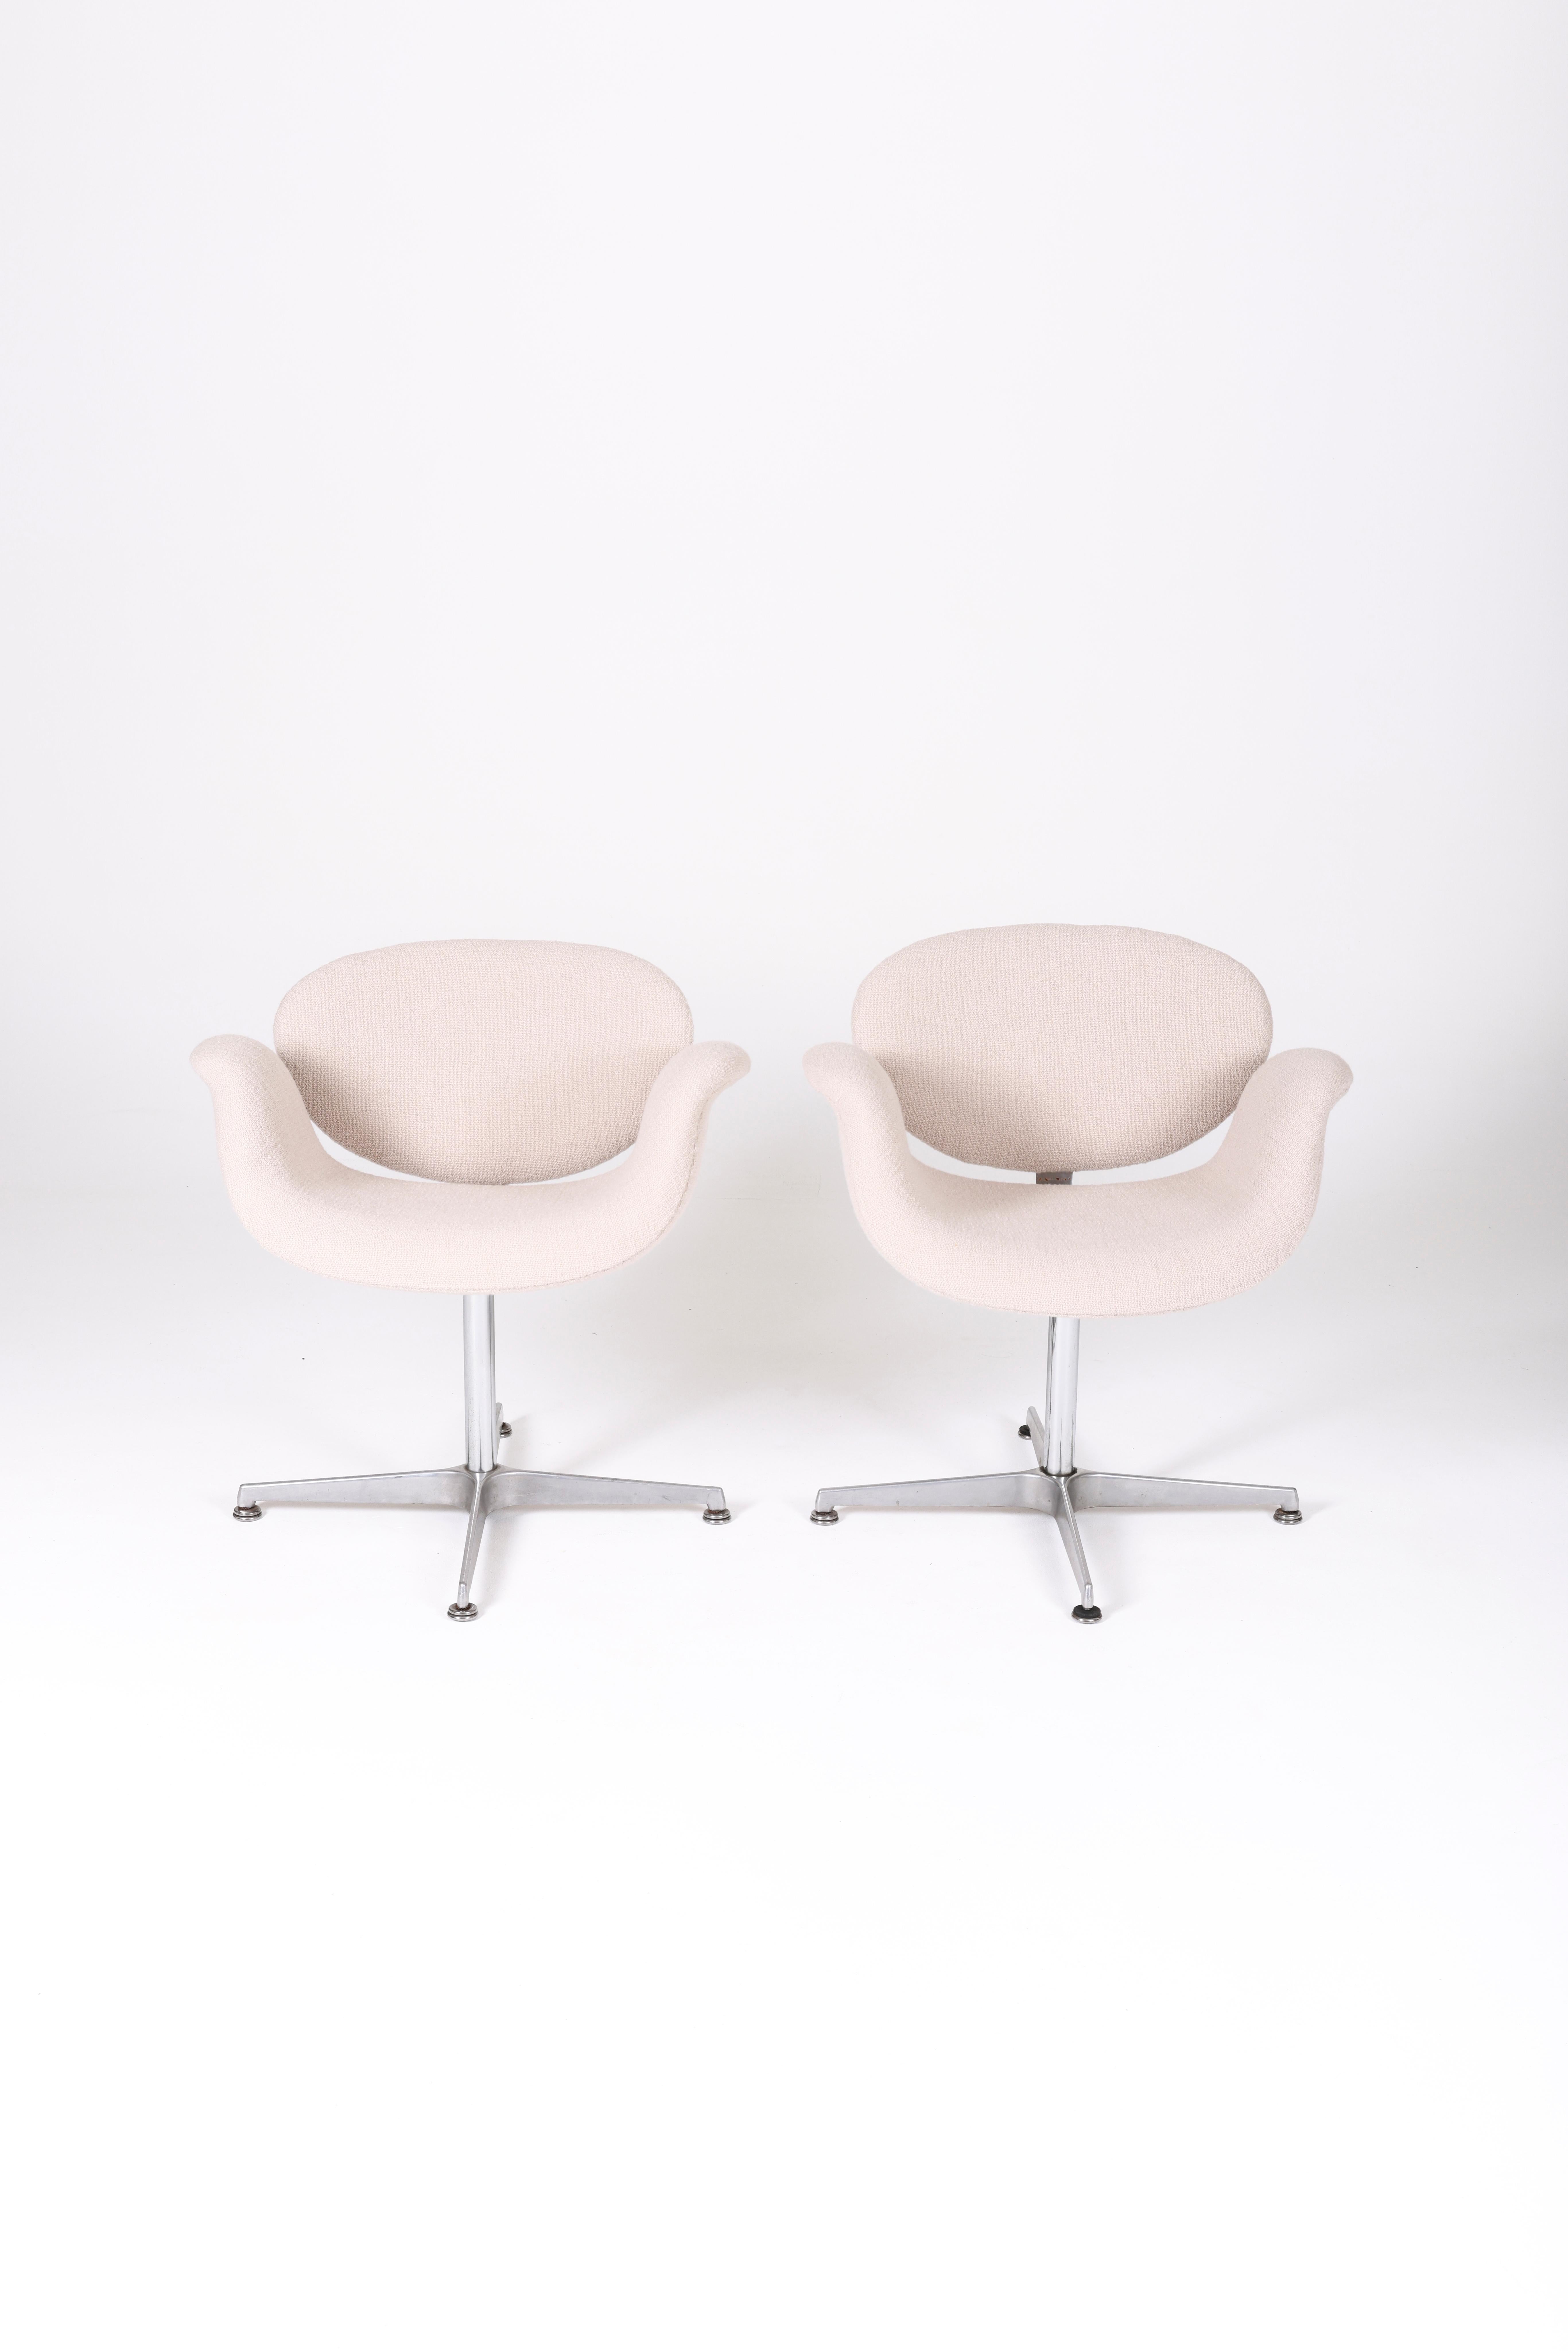 Tulip armchairs designed by Pierre Paulin for Artifort. The base is made of metal, and the seat and backrest have been reupholstered with high-quality sand-colored fabric. In very good condition.
LP838-839